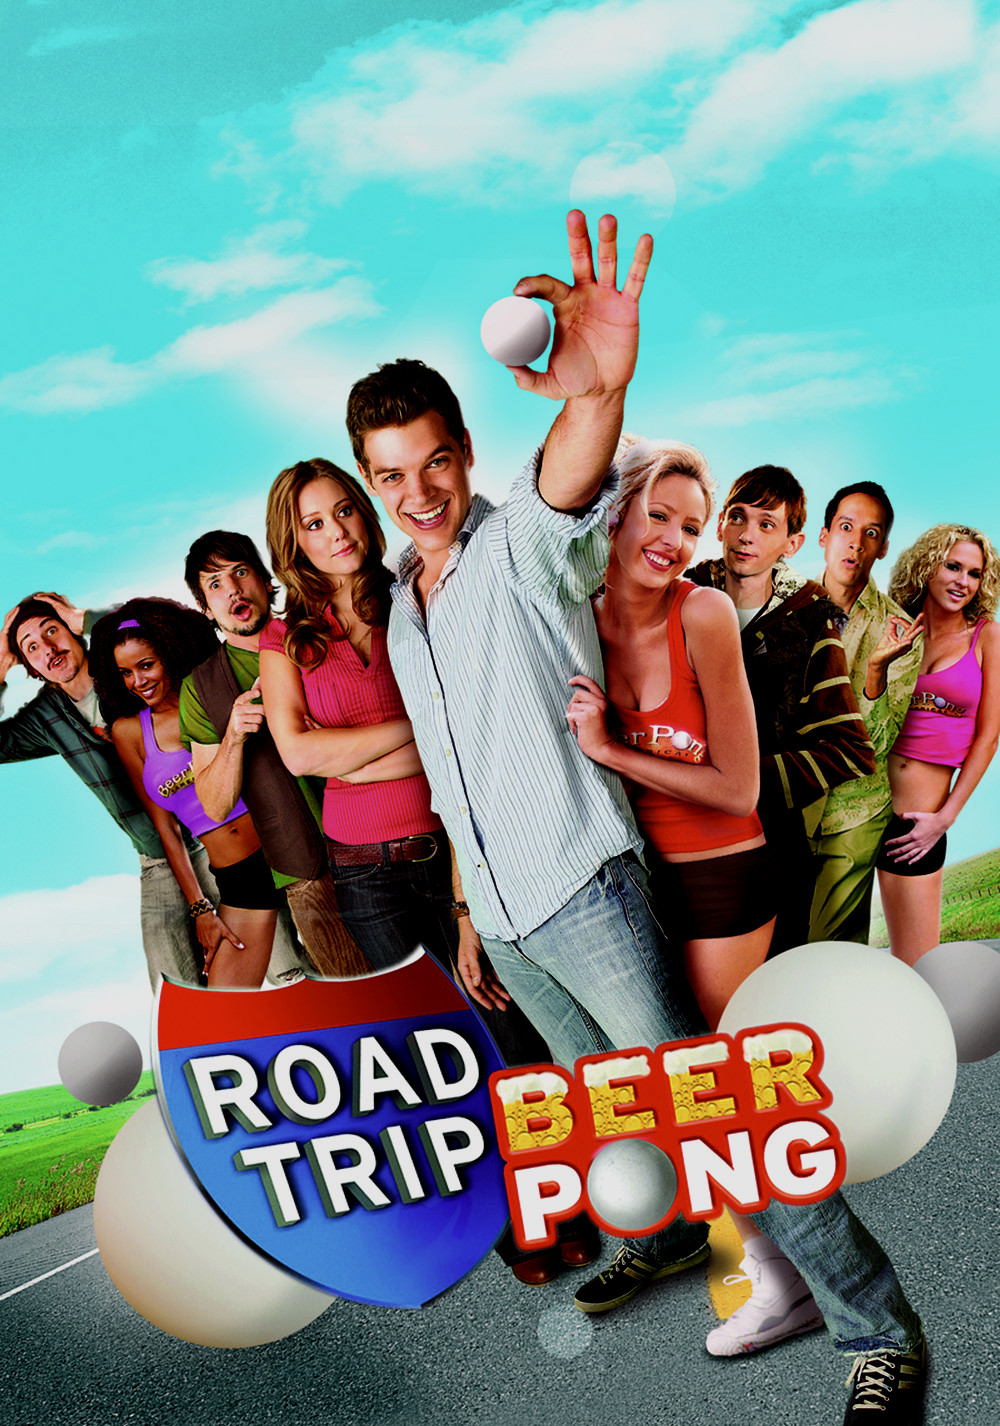 the cast of road trip beer pong